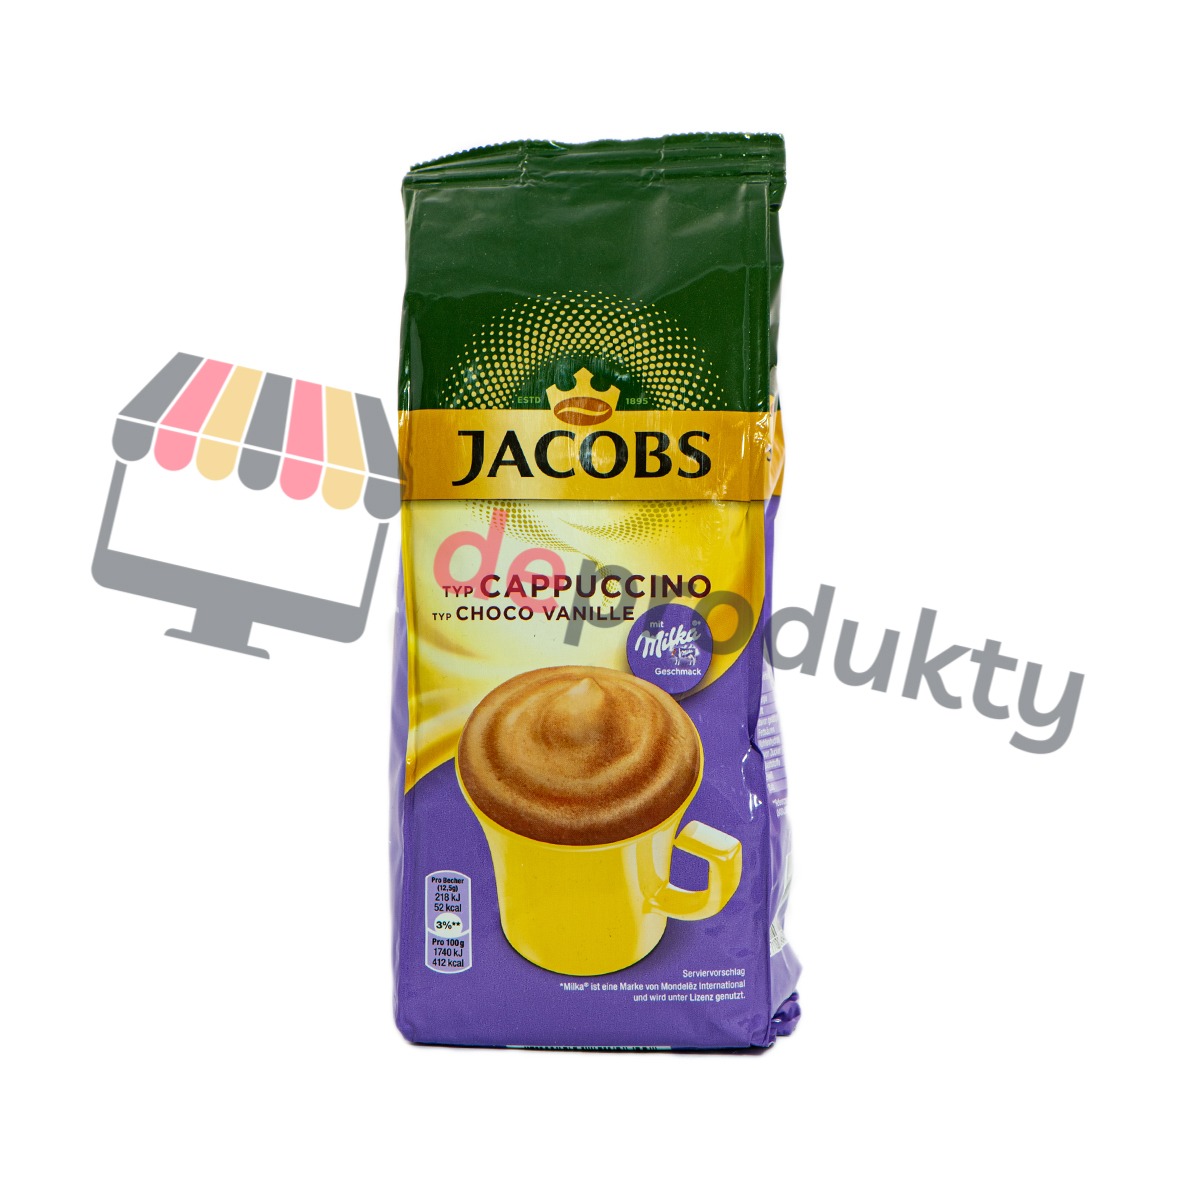 Jacobs Cappuccino Choco Vanille 500g